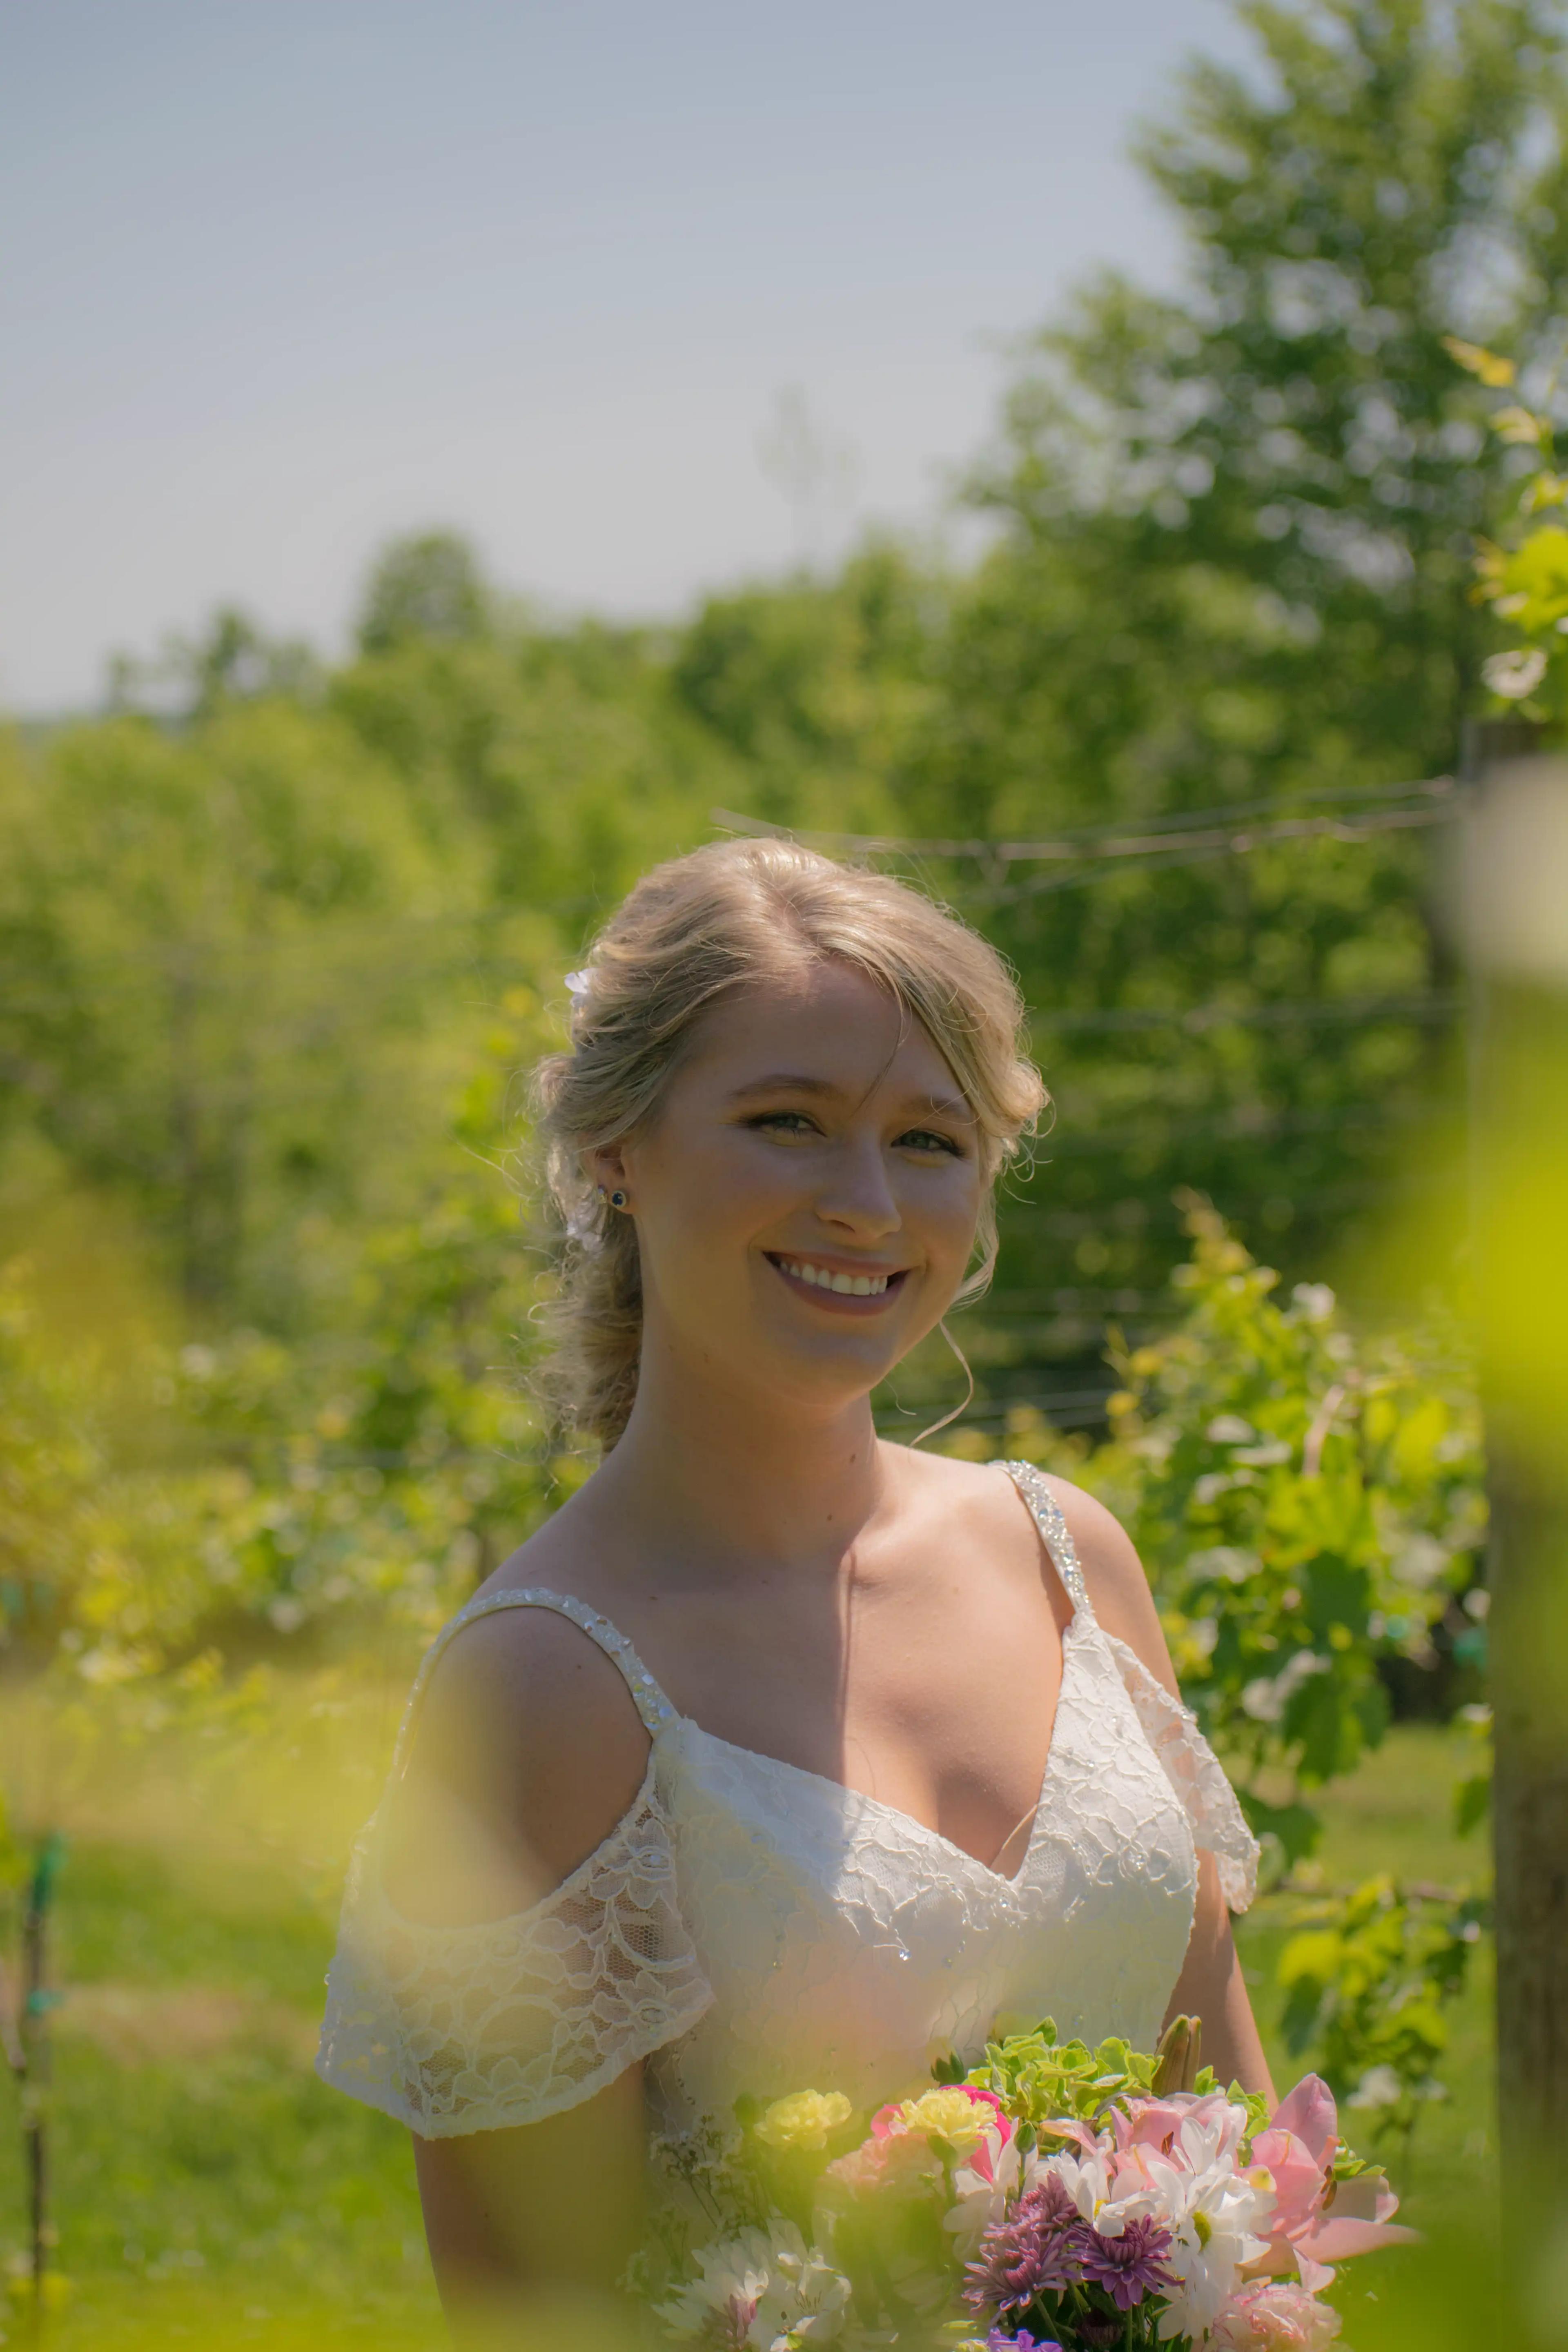 A close-up of the bride smiling in a vineyard with vines in the foreground and background drawing attention to the bride.